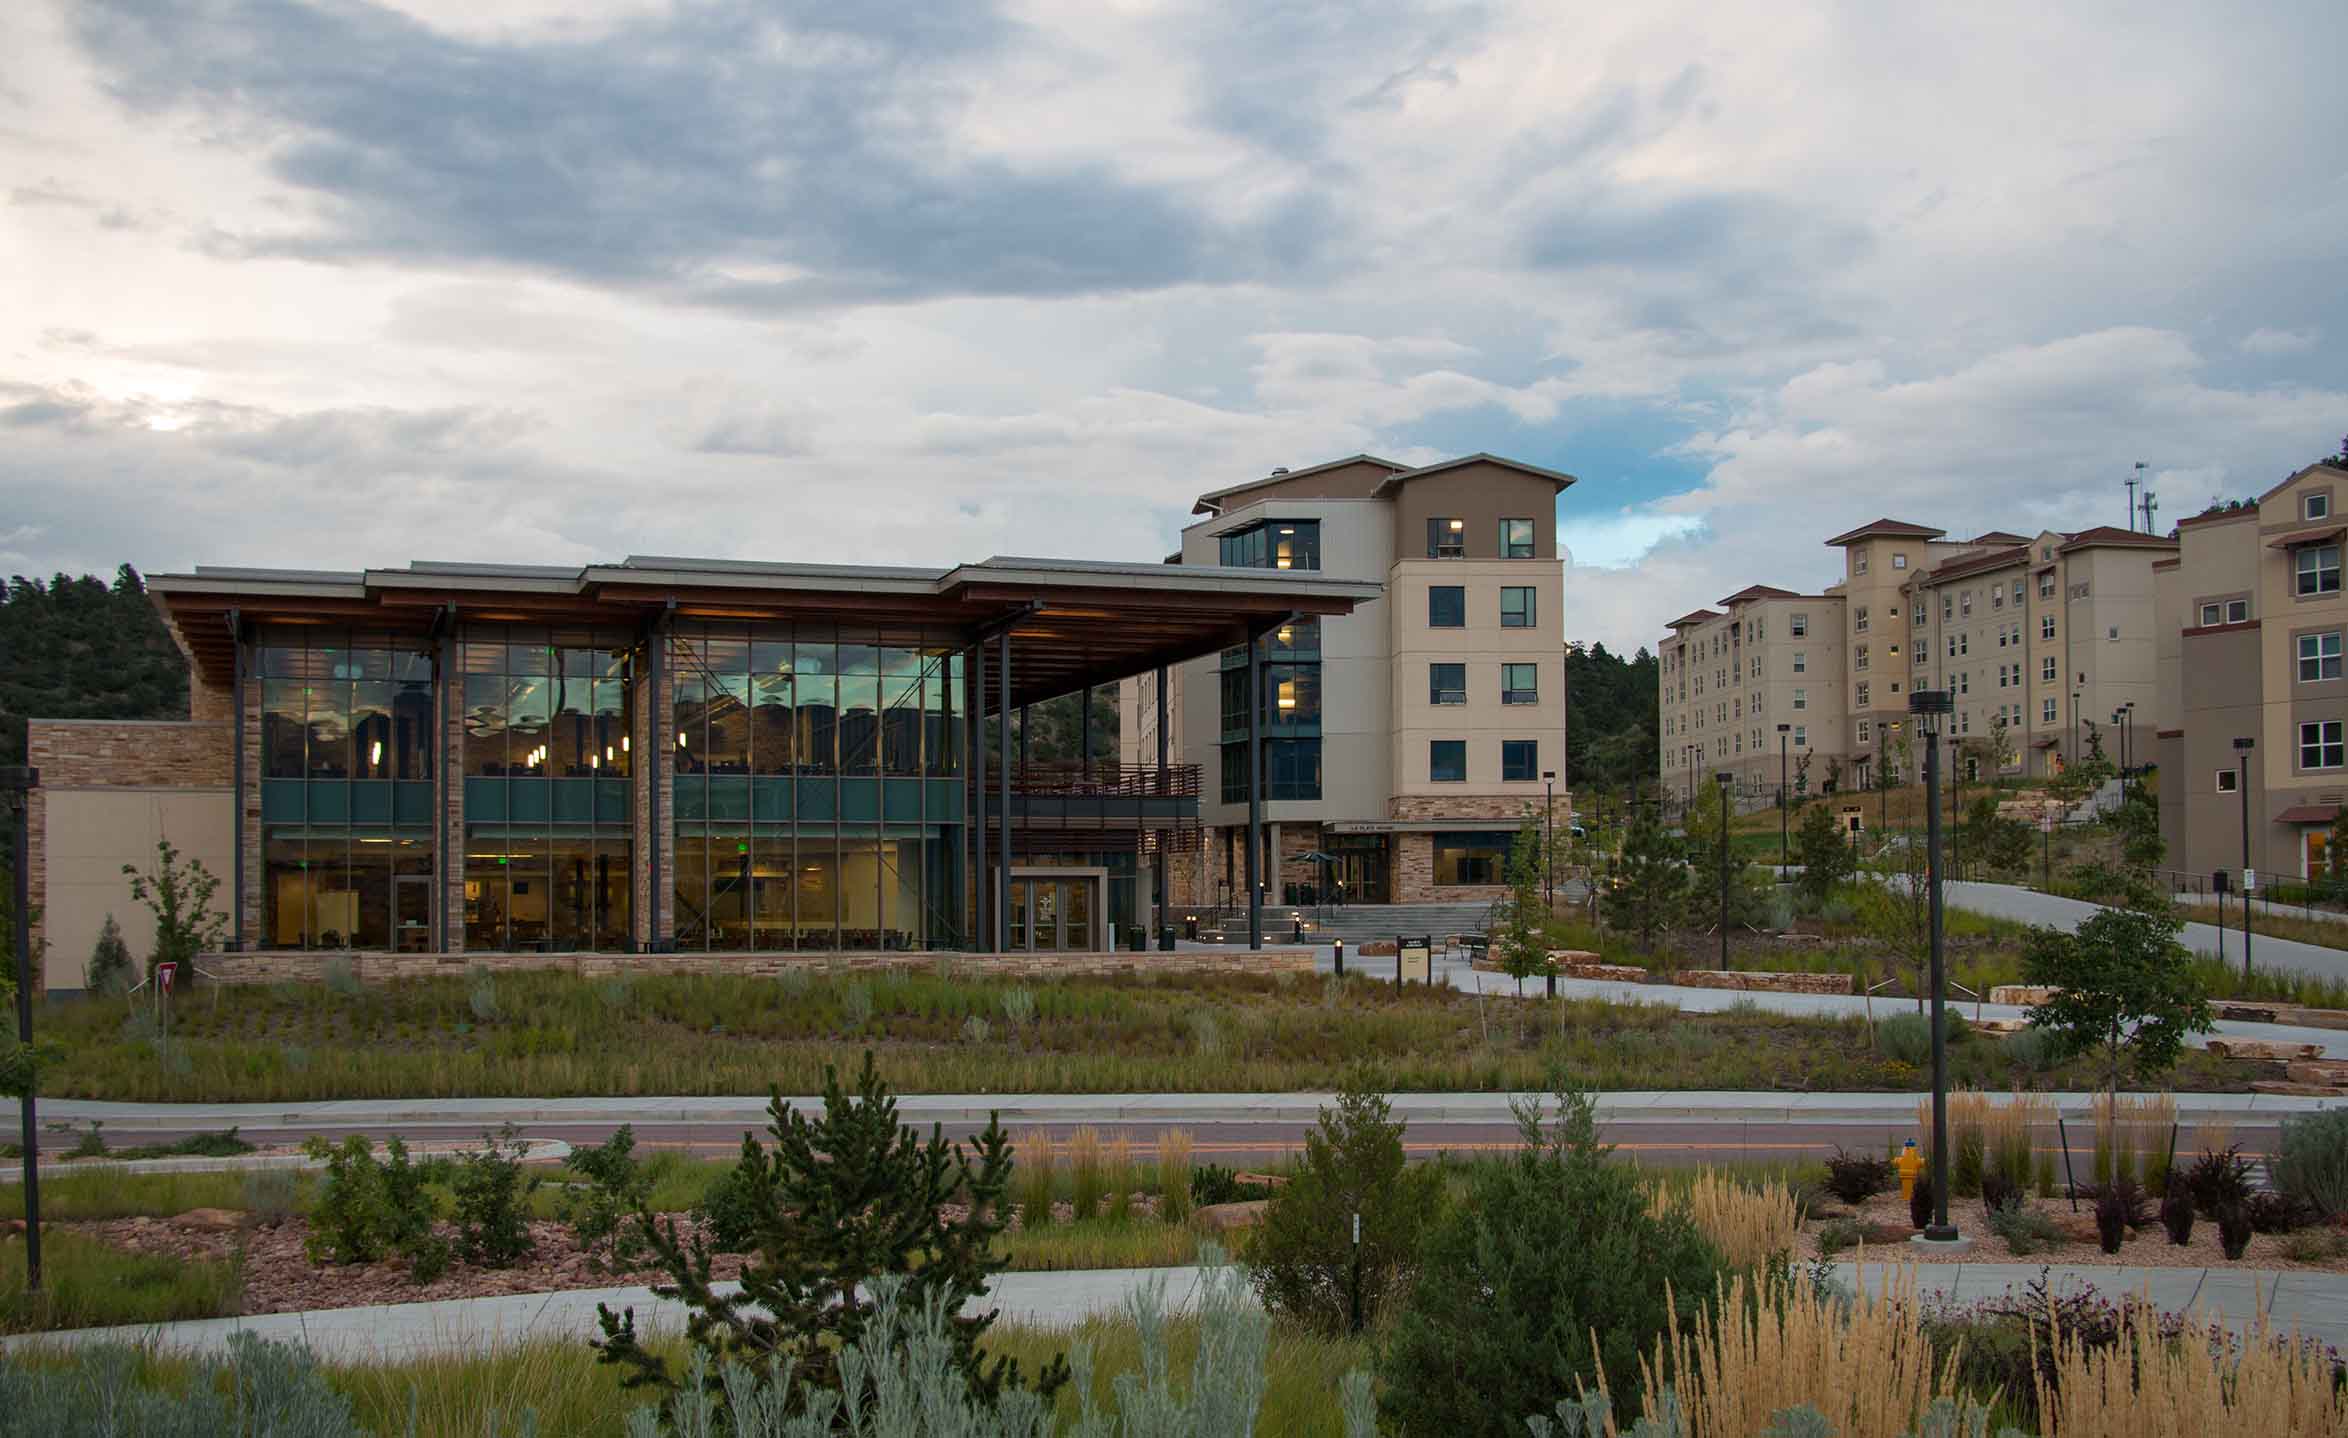 Roaring Fork is an eatery located on the UCCS campus.